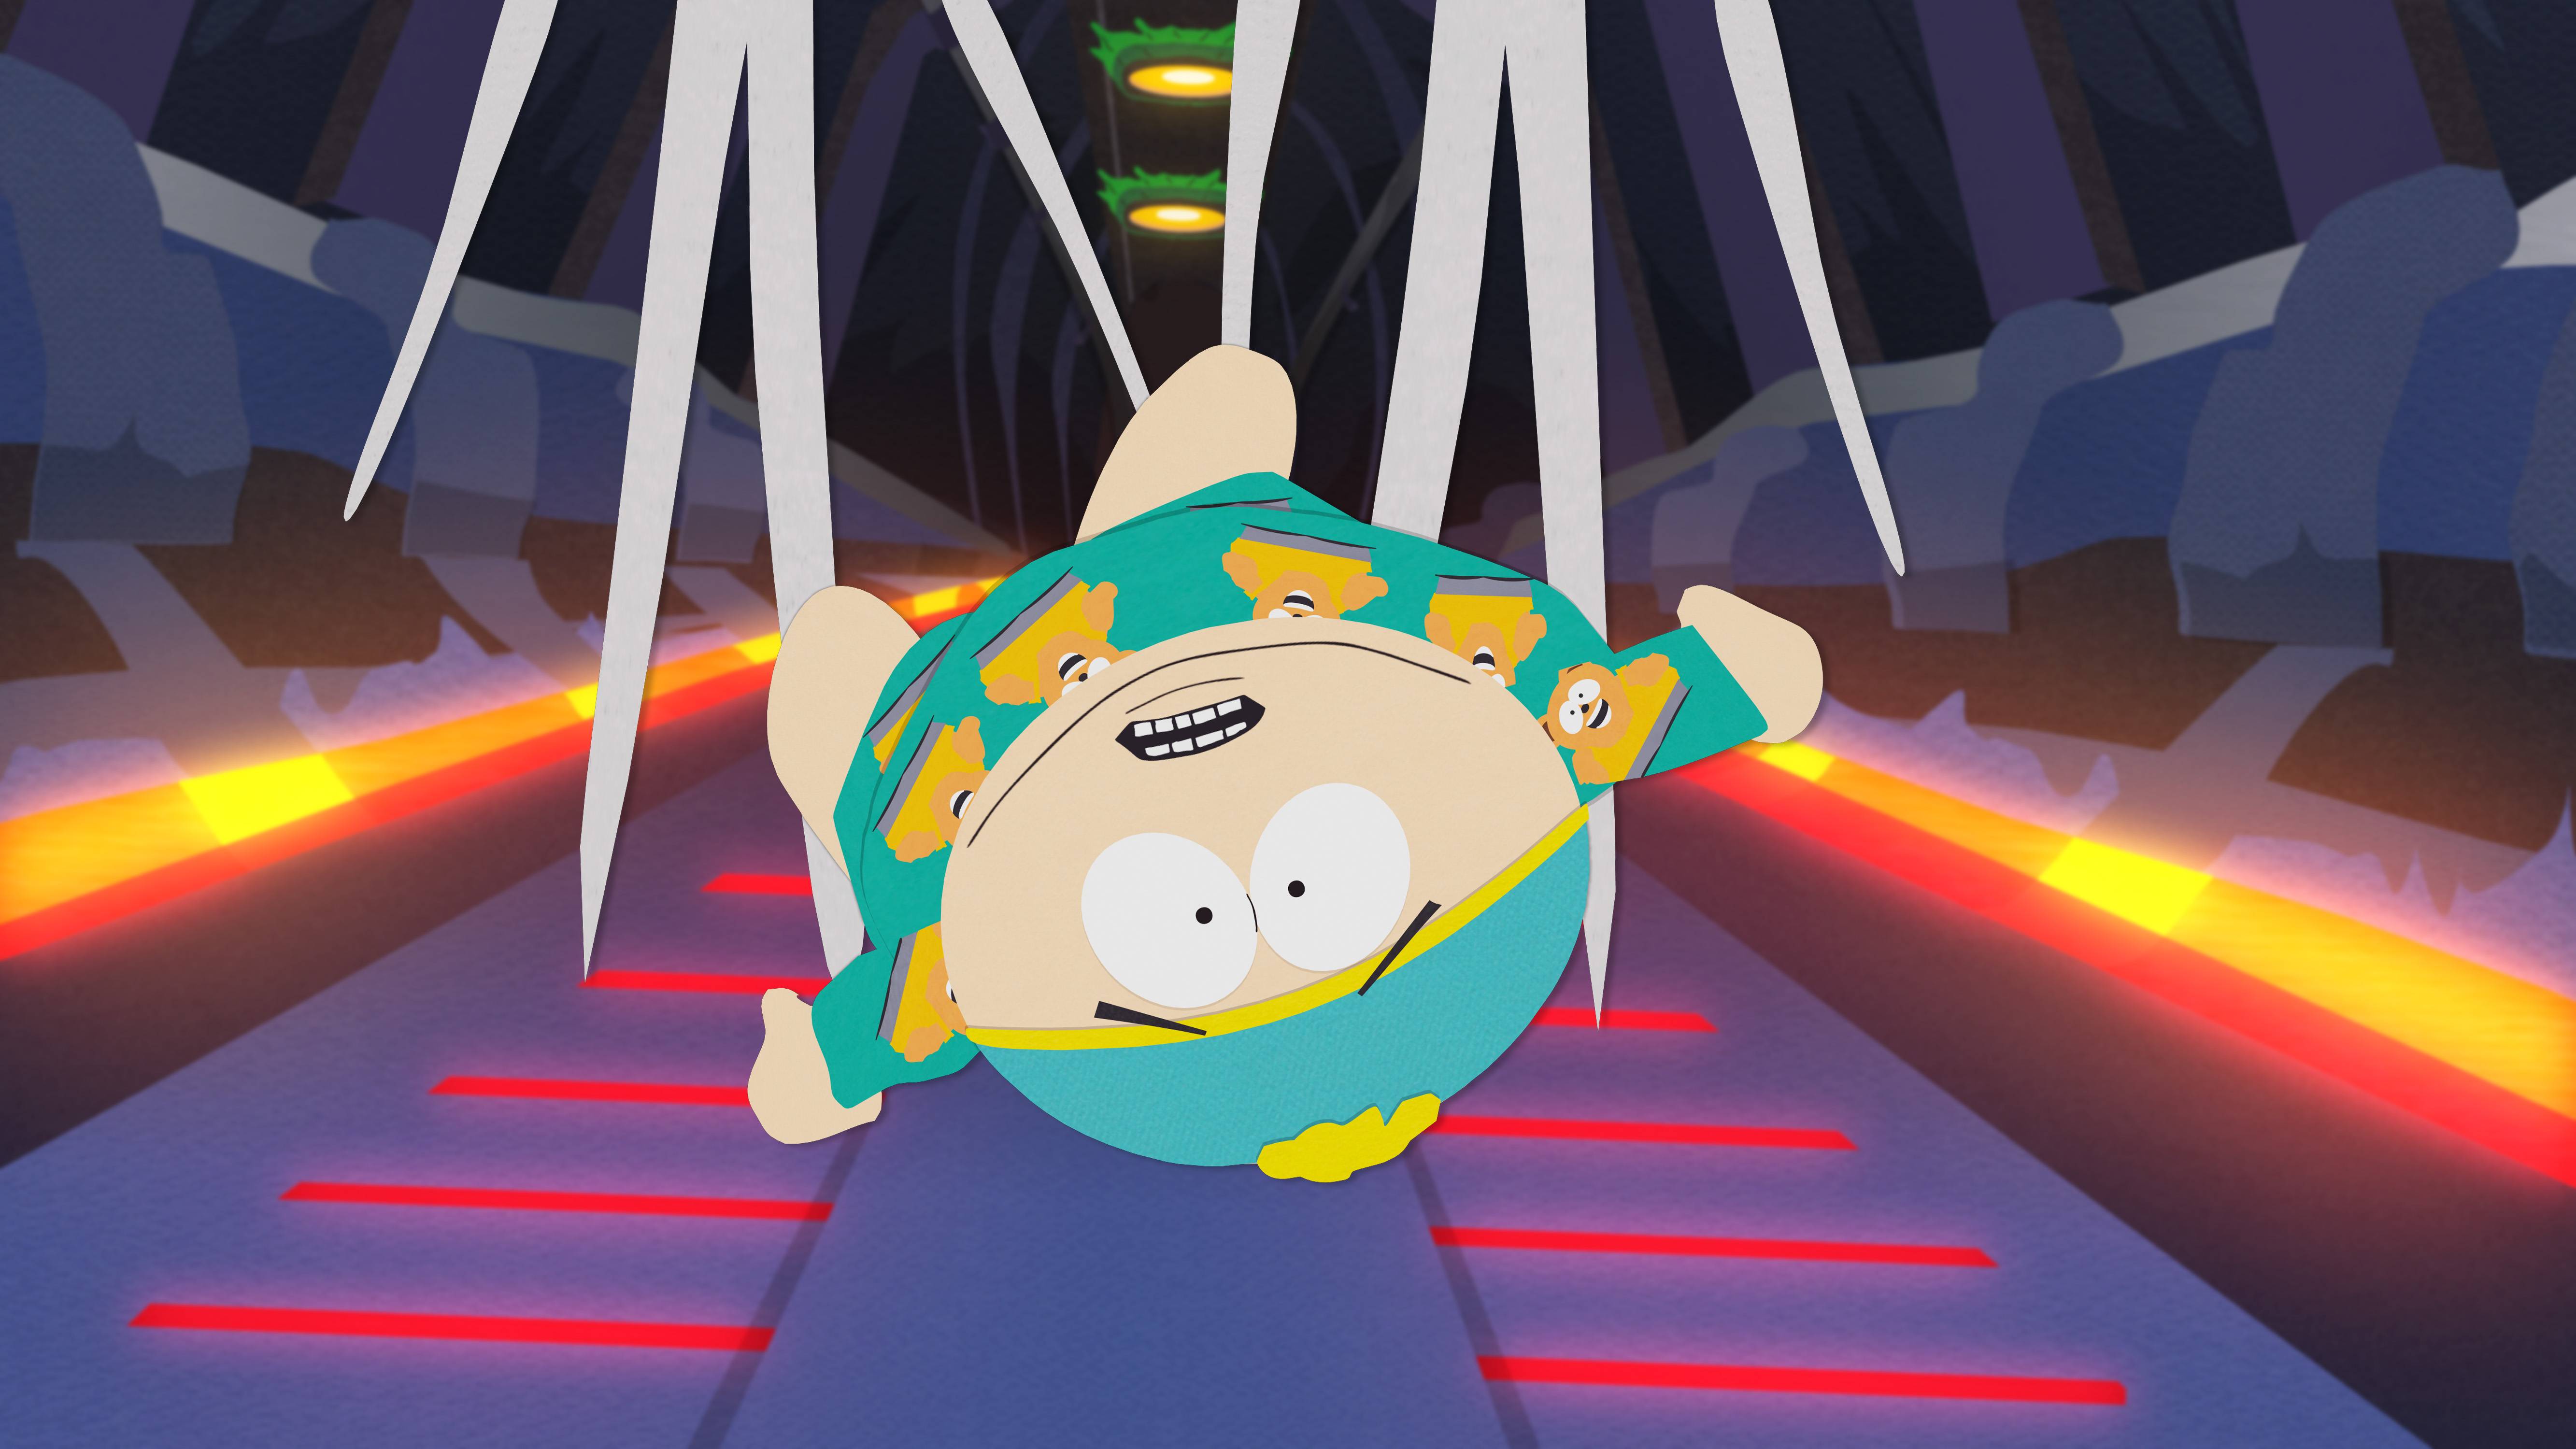 10 South Park Episodes That Went Too Far